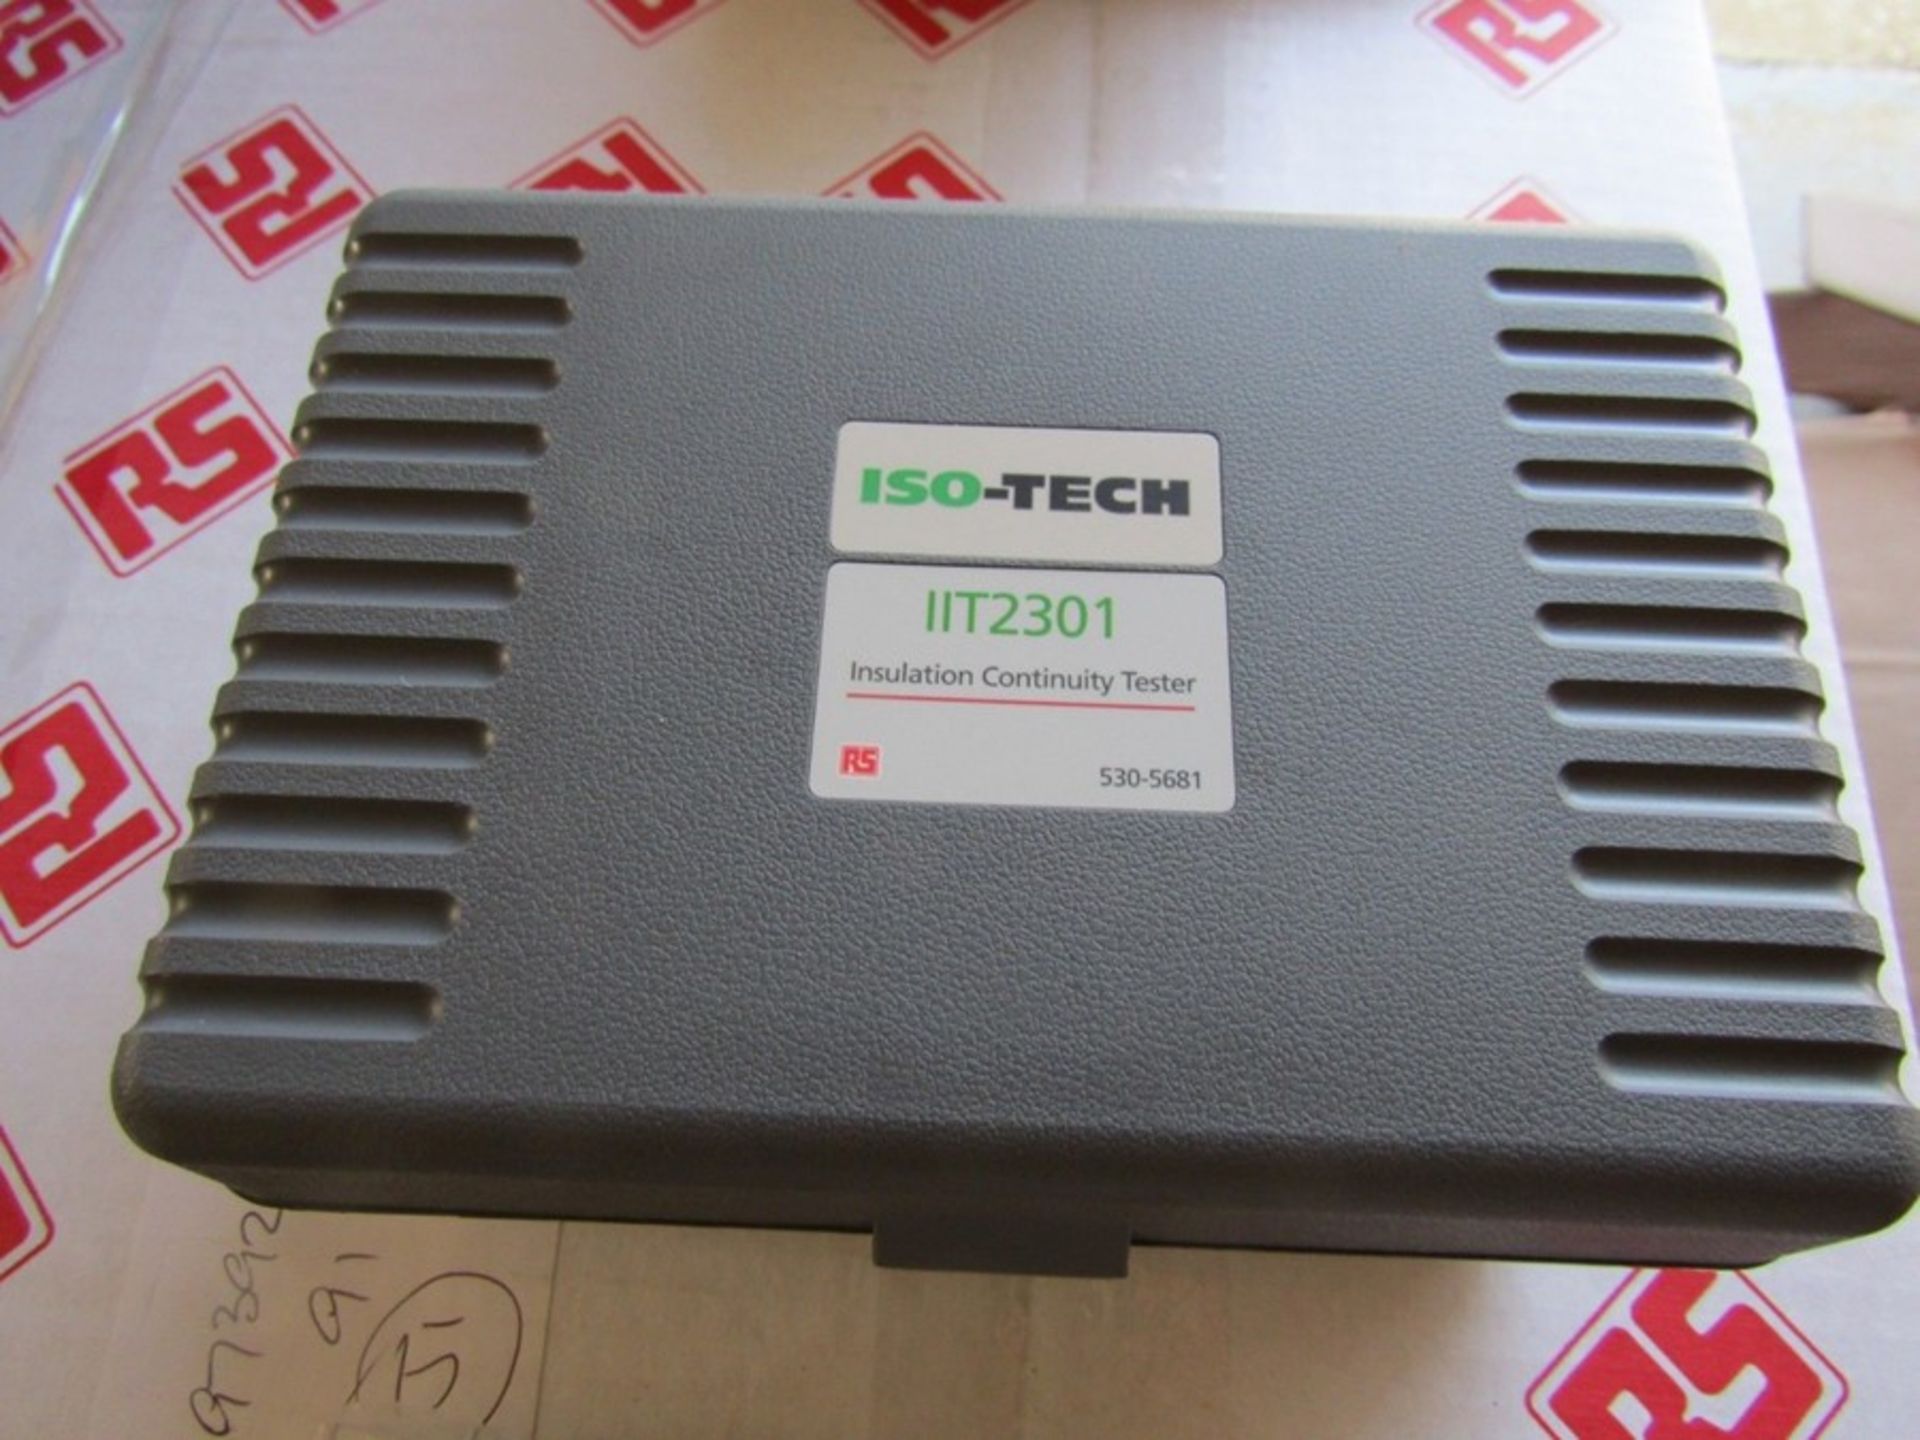 10 x ISOTECH IIT2301 Insulation Continuity Tester 400MΩ CAT III 300V - Image 2 of 4